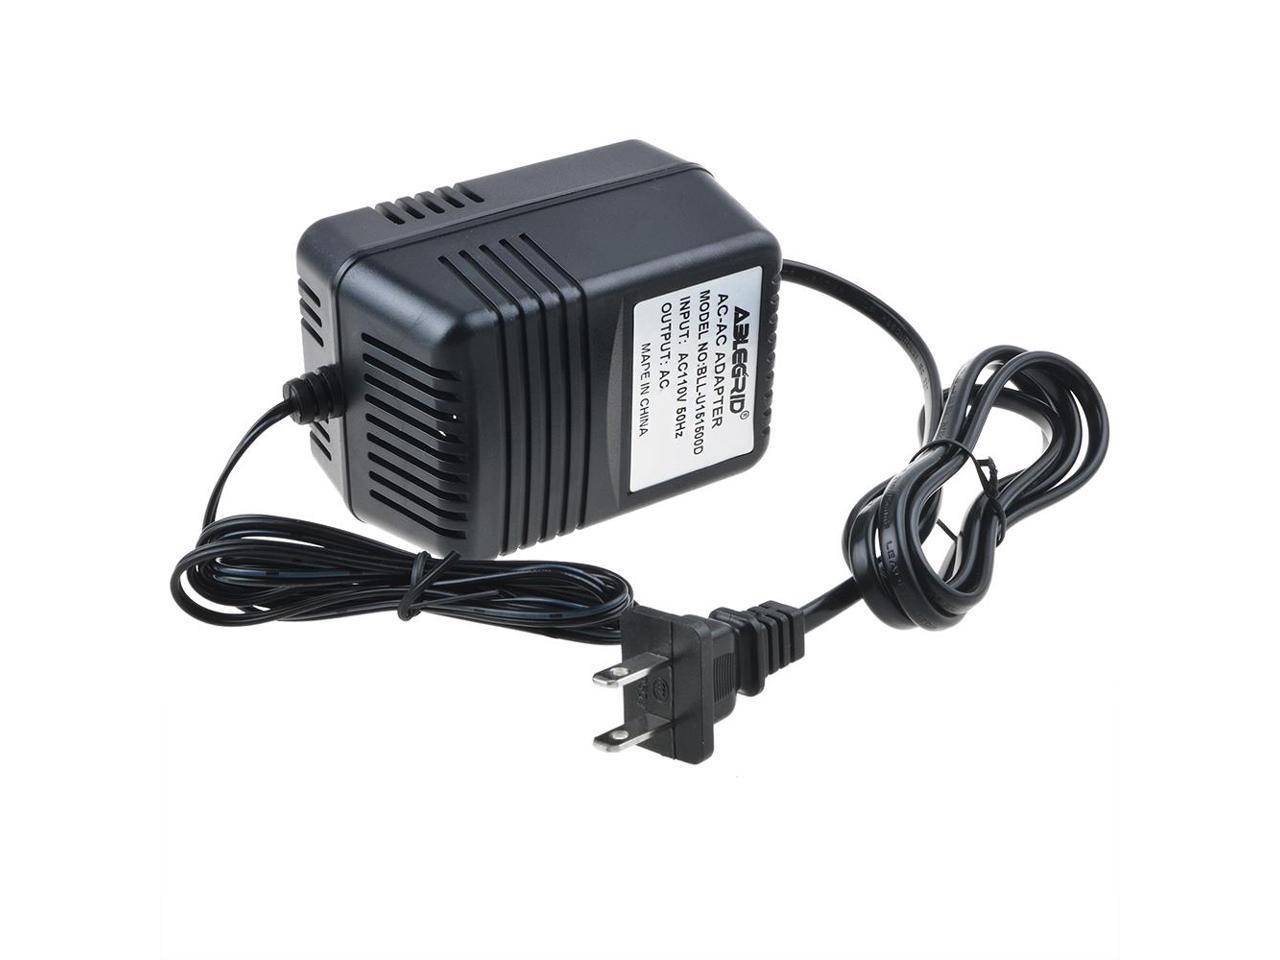 11103741 apx AP3405 UA-1205C Power Cord psu AC-AC Adapter For METTLER TOLEDO No 